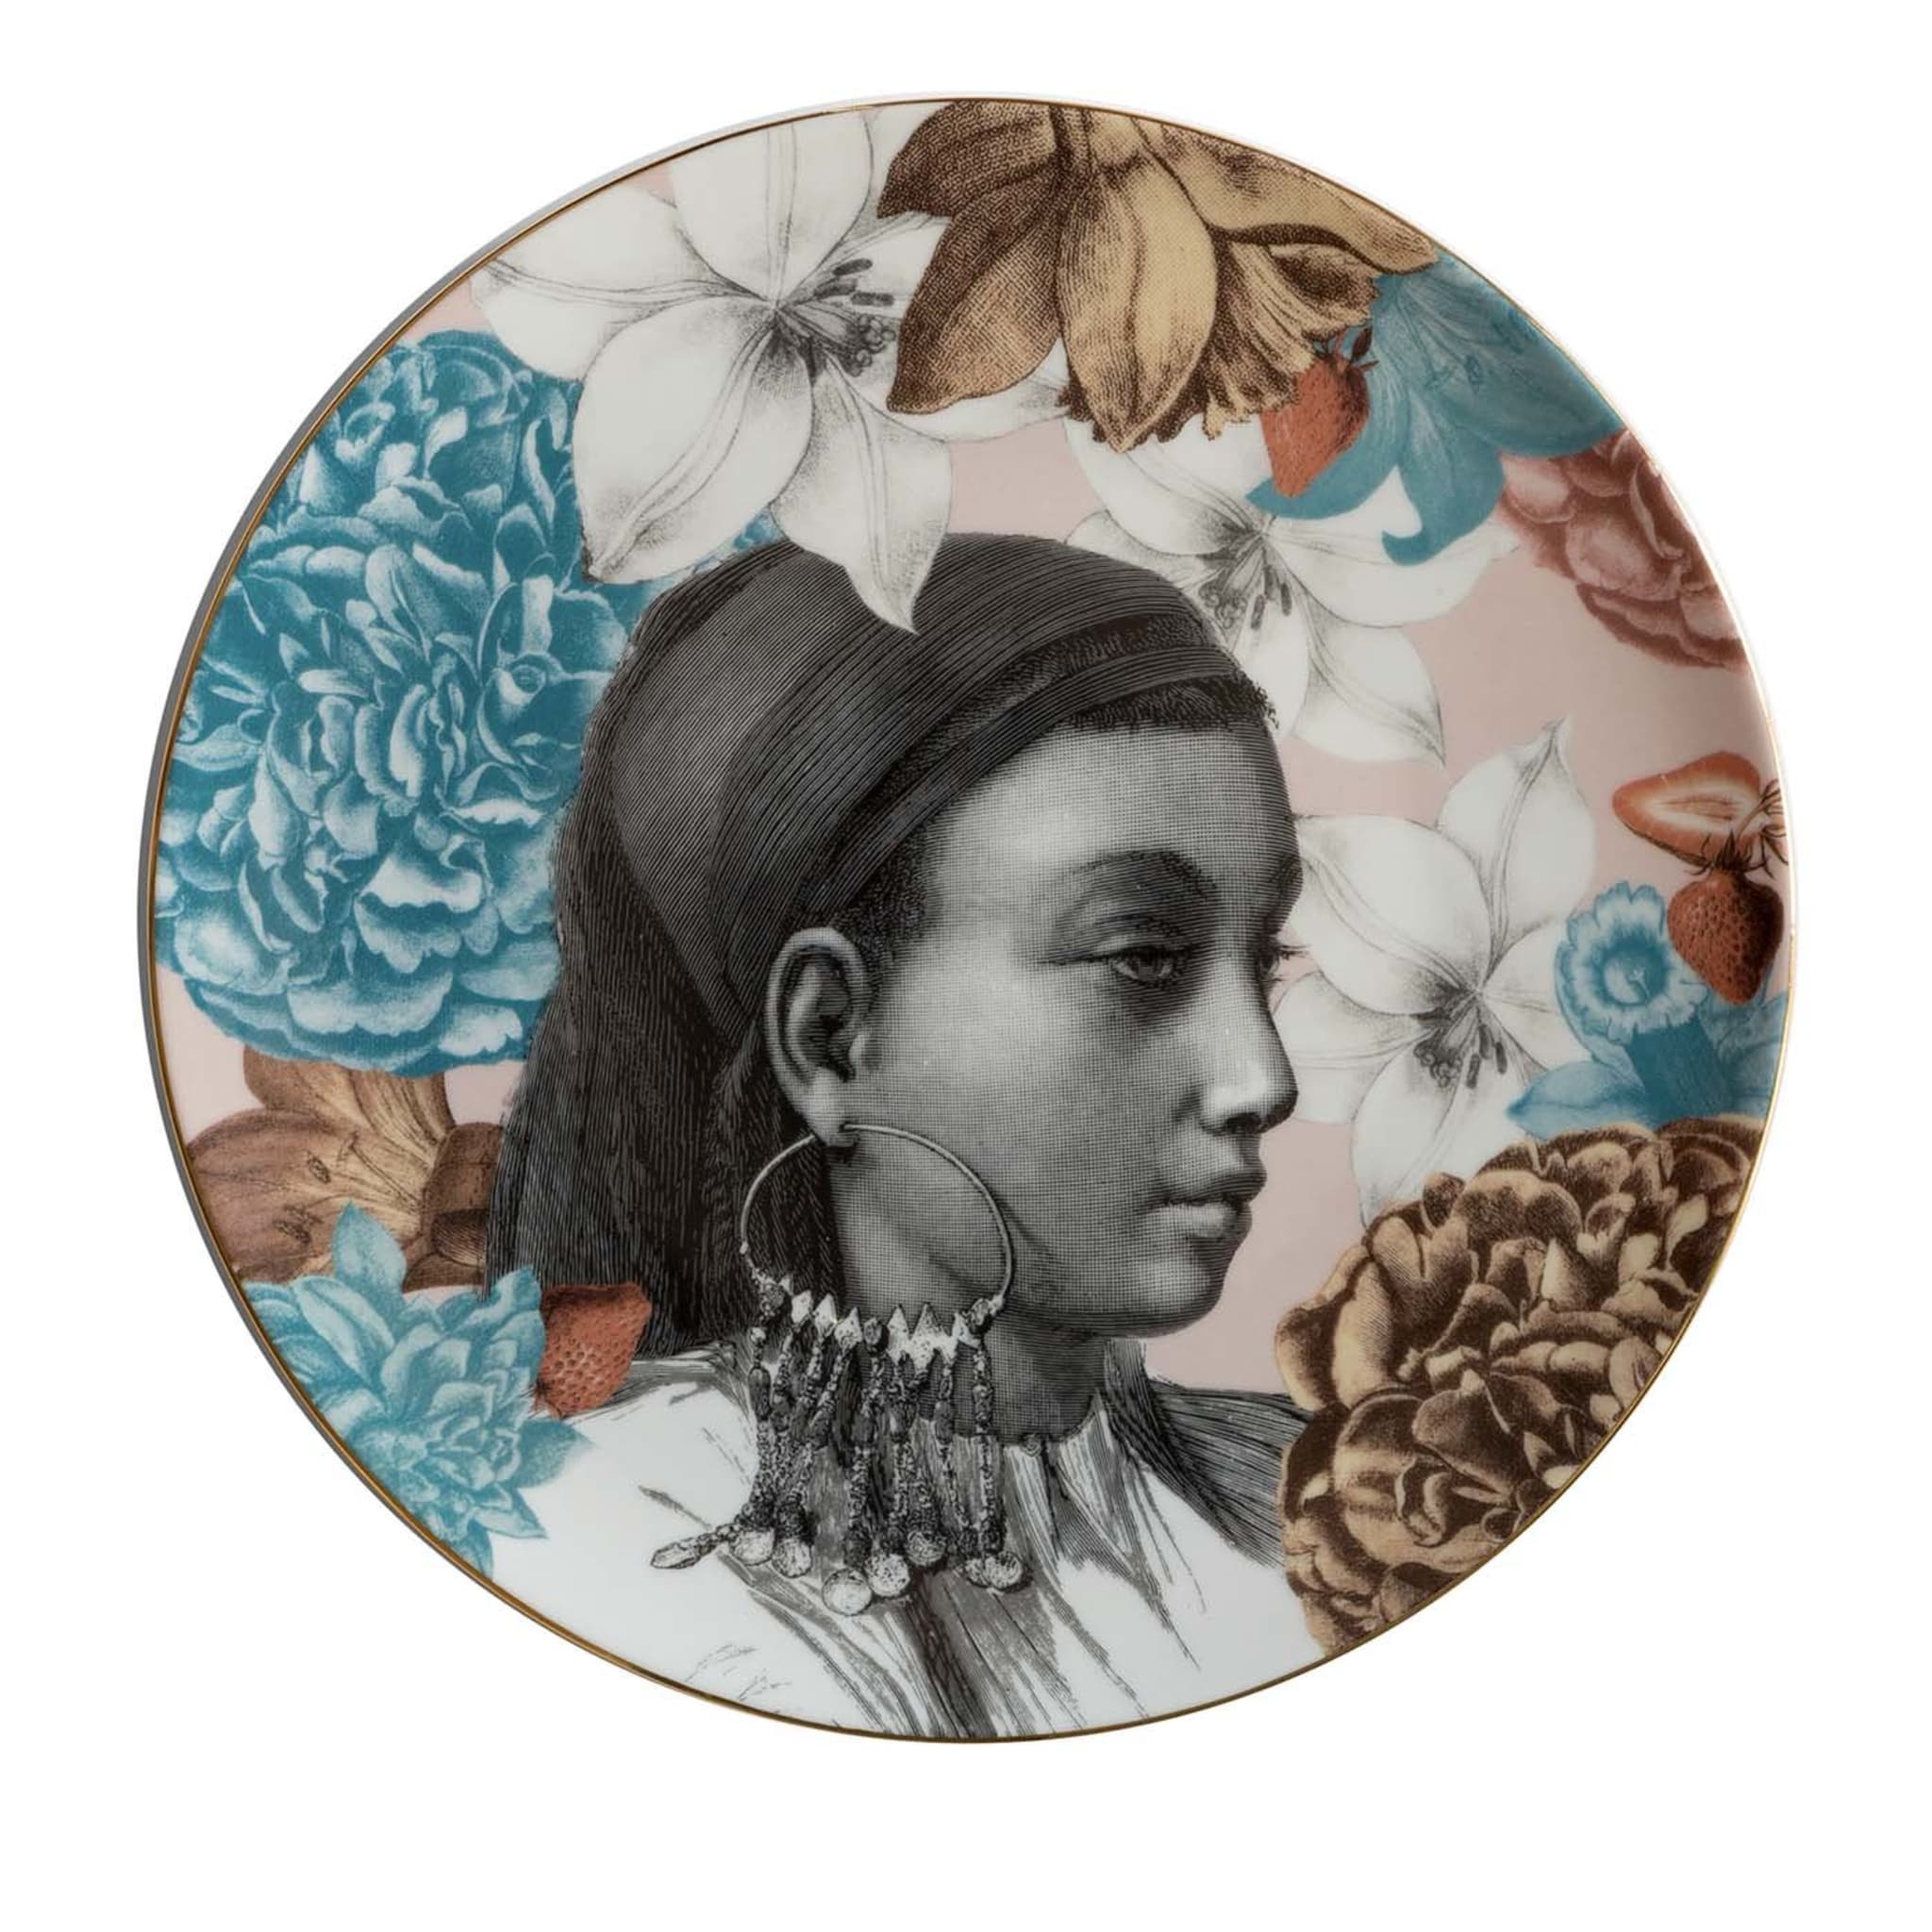 Cairo Porcelain Dinner Plate With A Woman'S Face And Flowers #1 - Main view